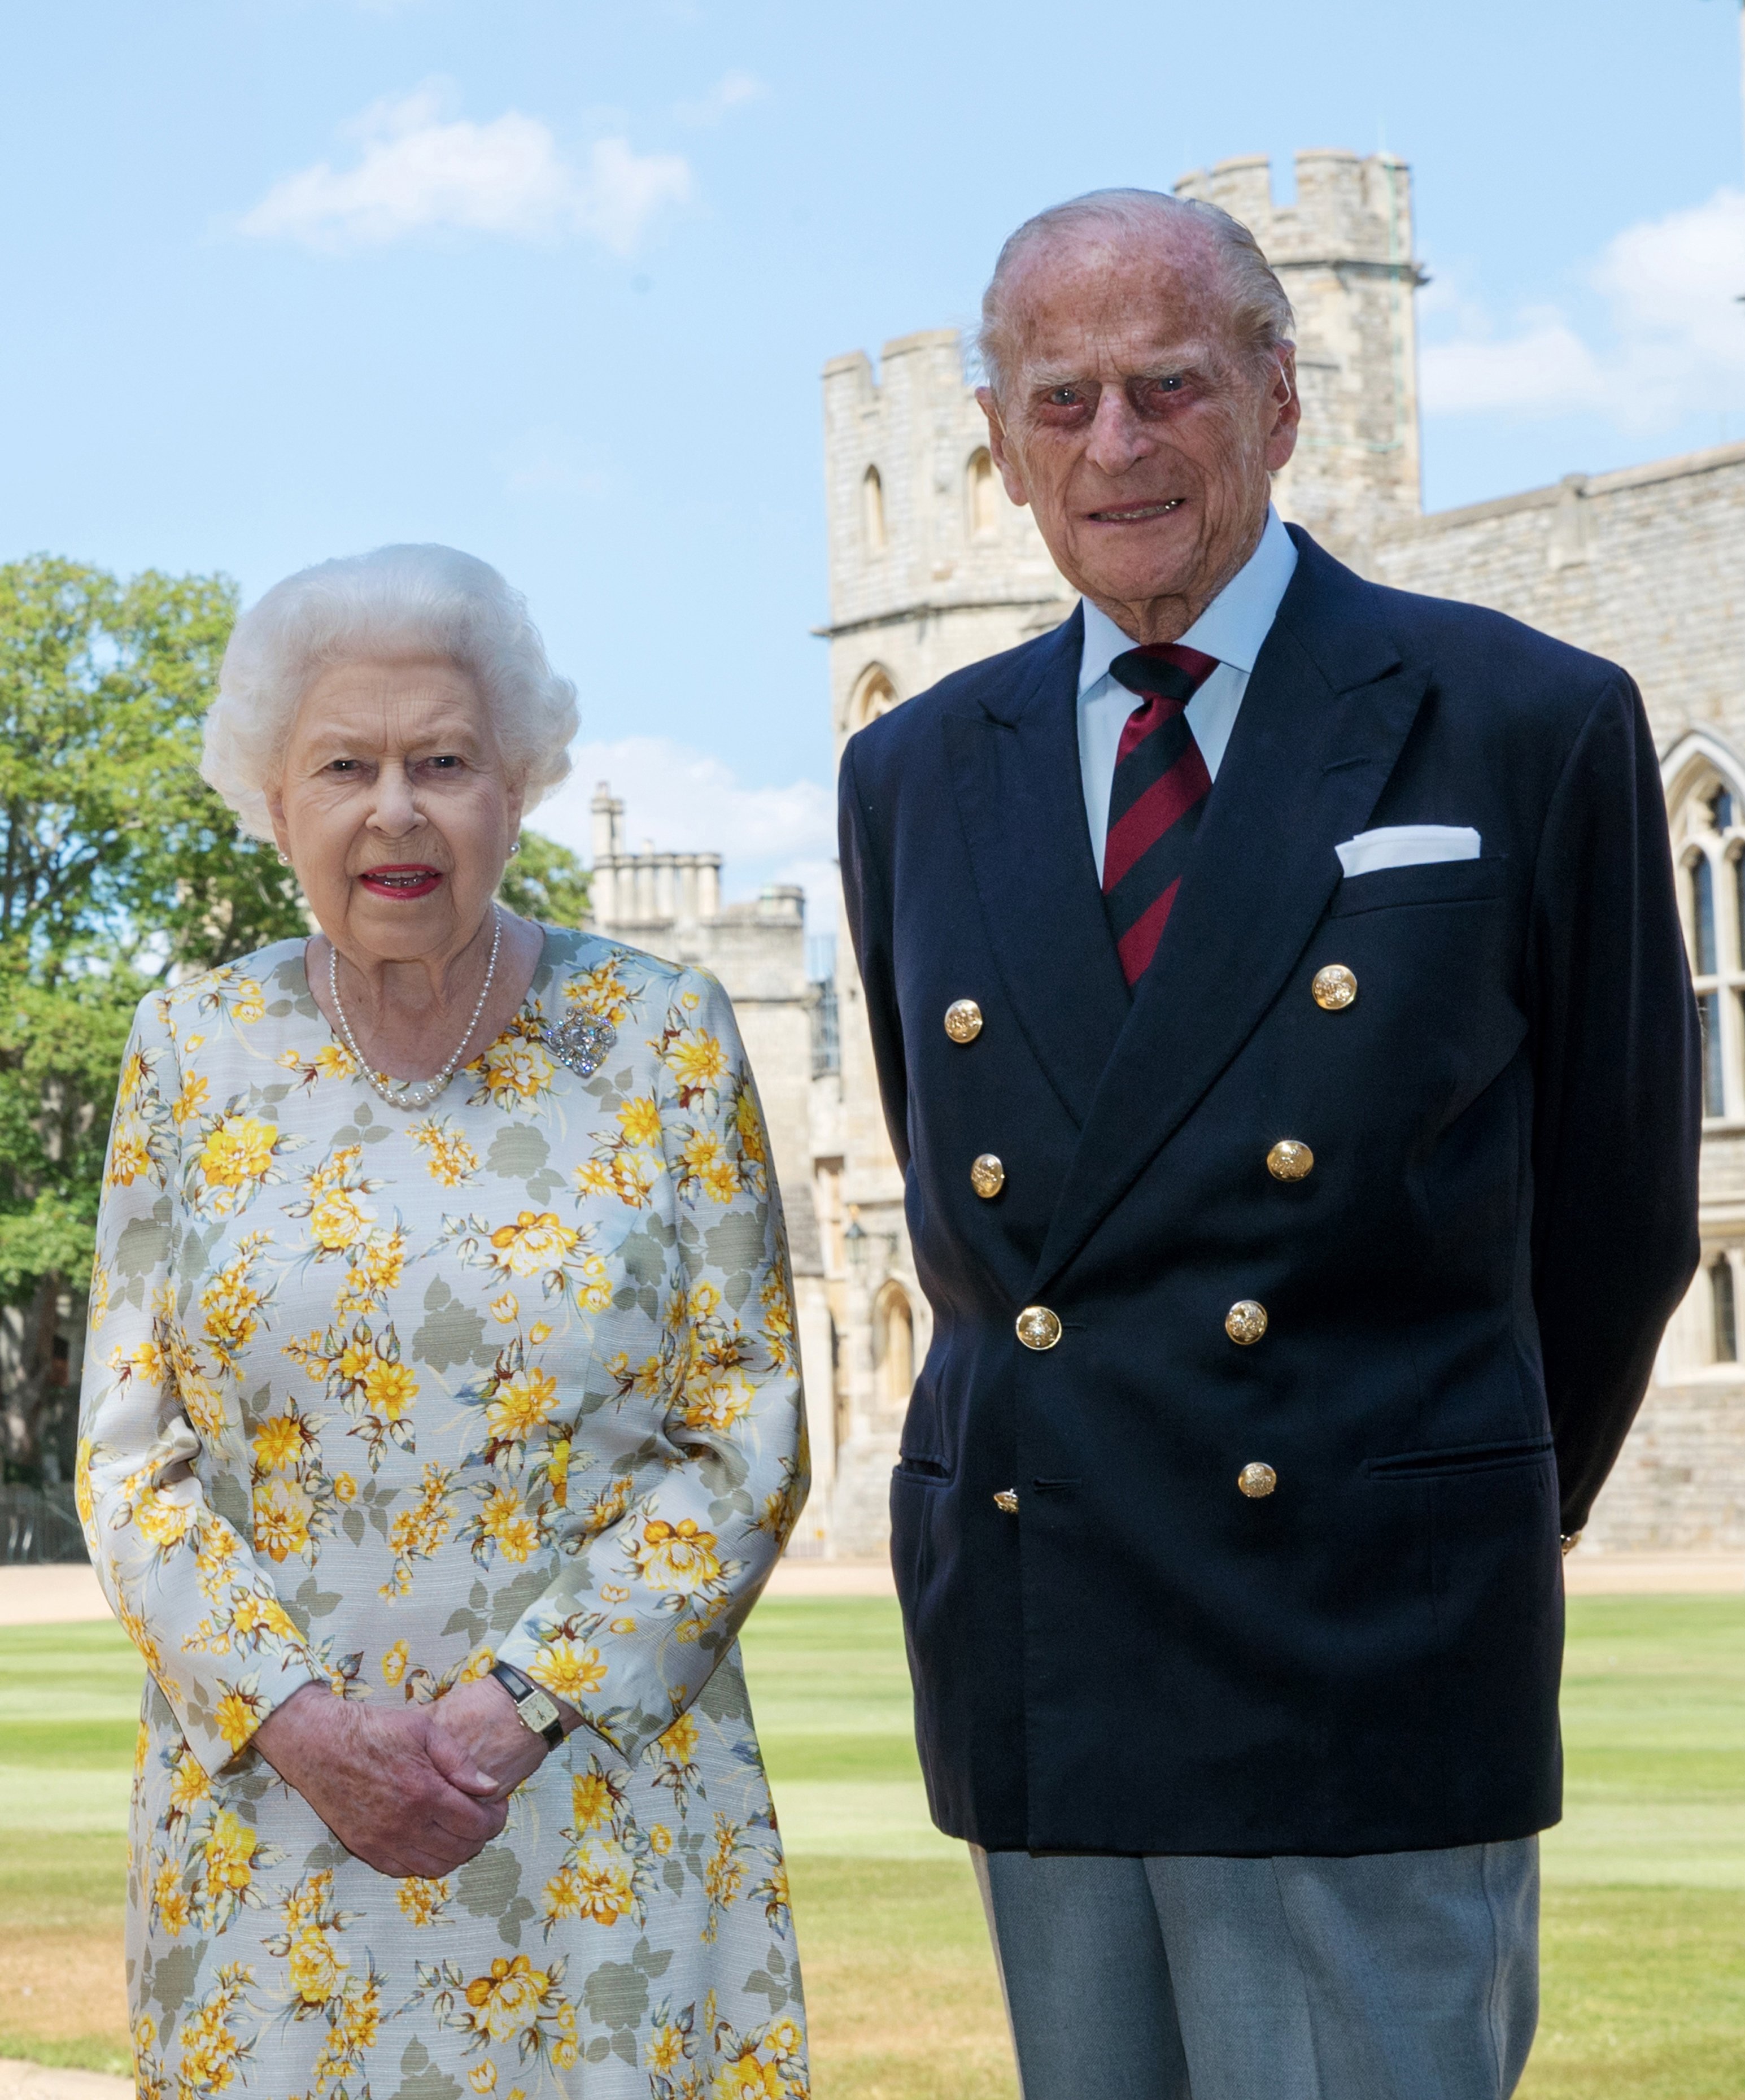 Queen Elizabeth II and the Duke of Edinburgh pose in the quadrangle of Windsor Castle ahead of his 99th birthday on Wednesday, on June 1, 2020 | Photo: Getty Images.